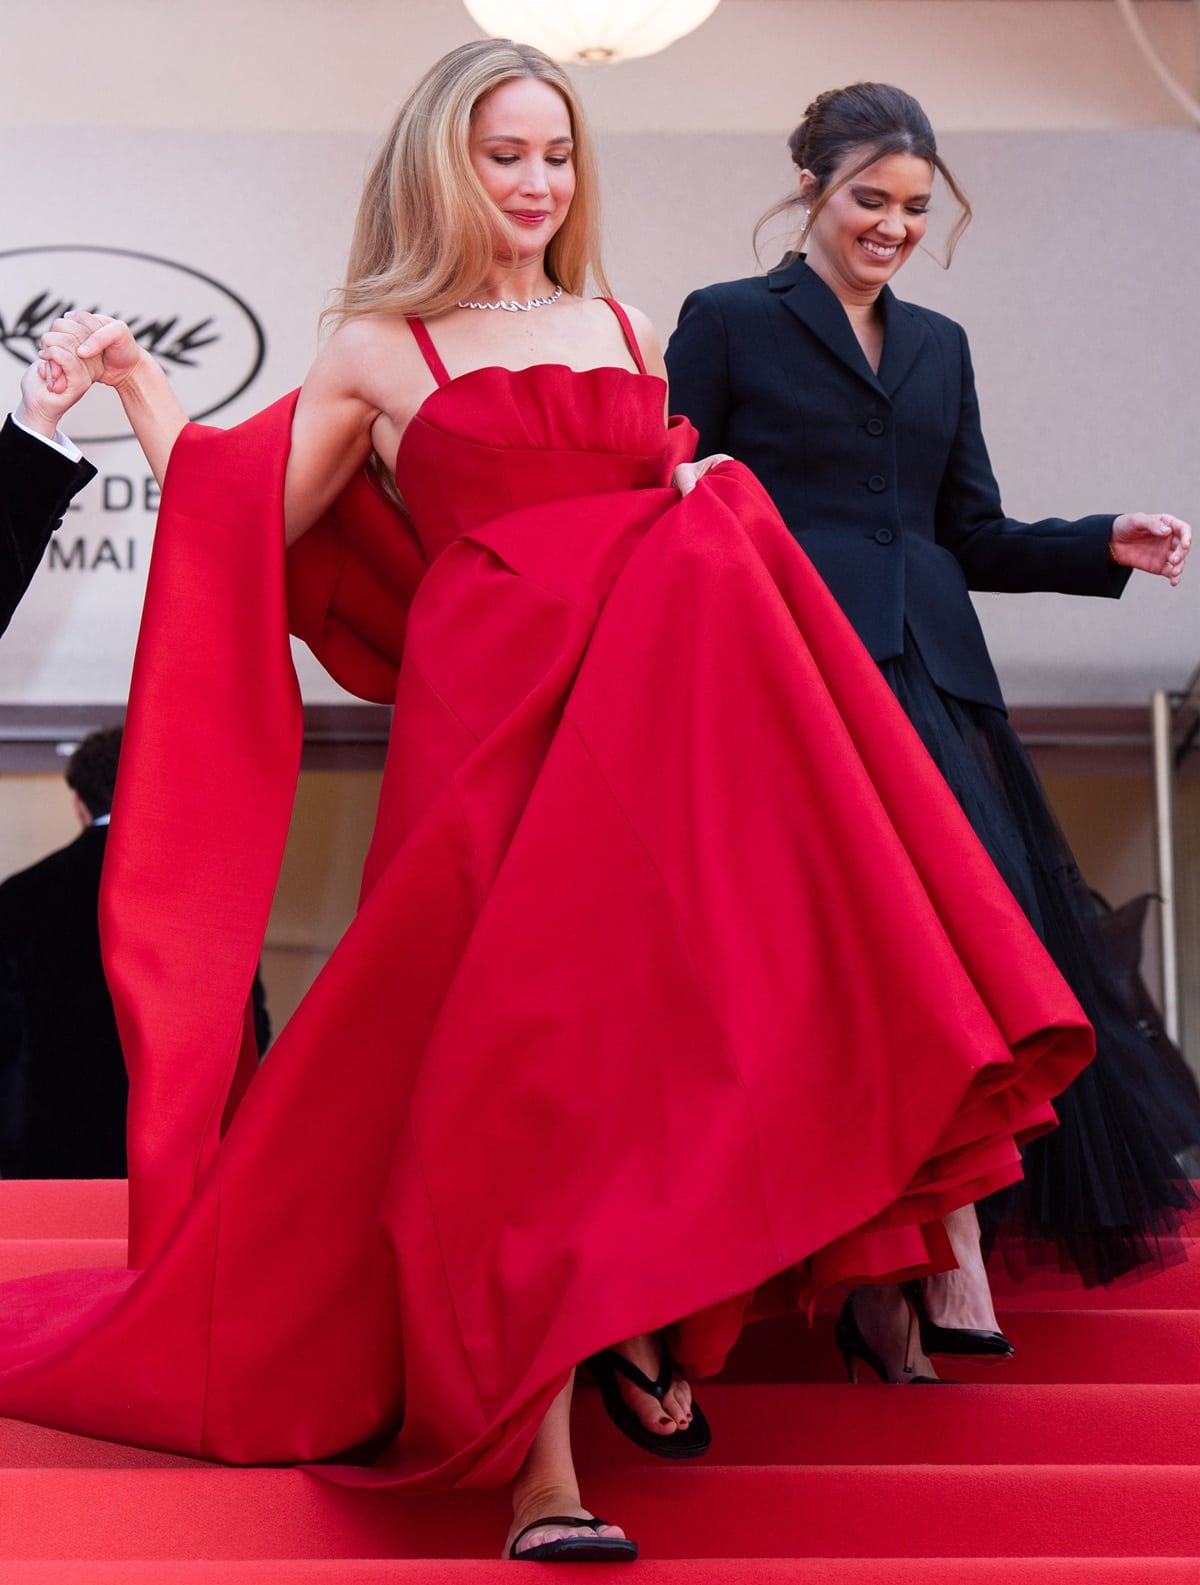 Arriving with Justine Ciarrocchi, Jennifer Lawrence made a striking fashion statement in a custom cardinal red Christian Dior Couture ball gown boasting a wrap-around shawl, a scalloped neckline, and a voluminous pleated skirt